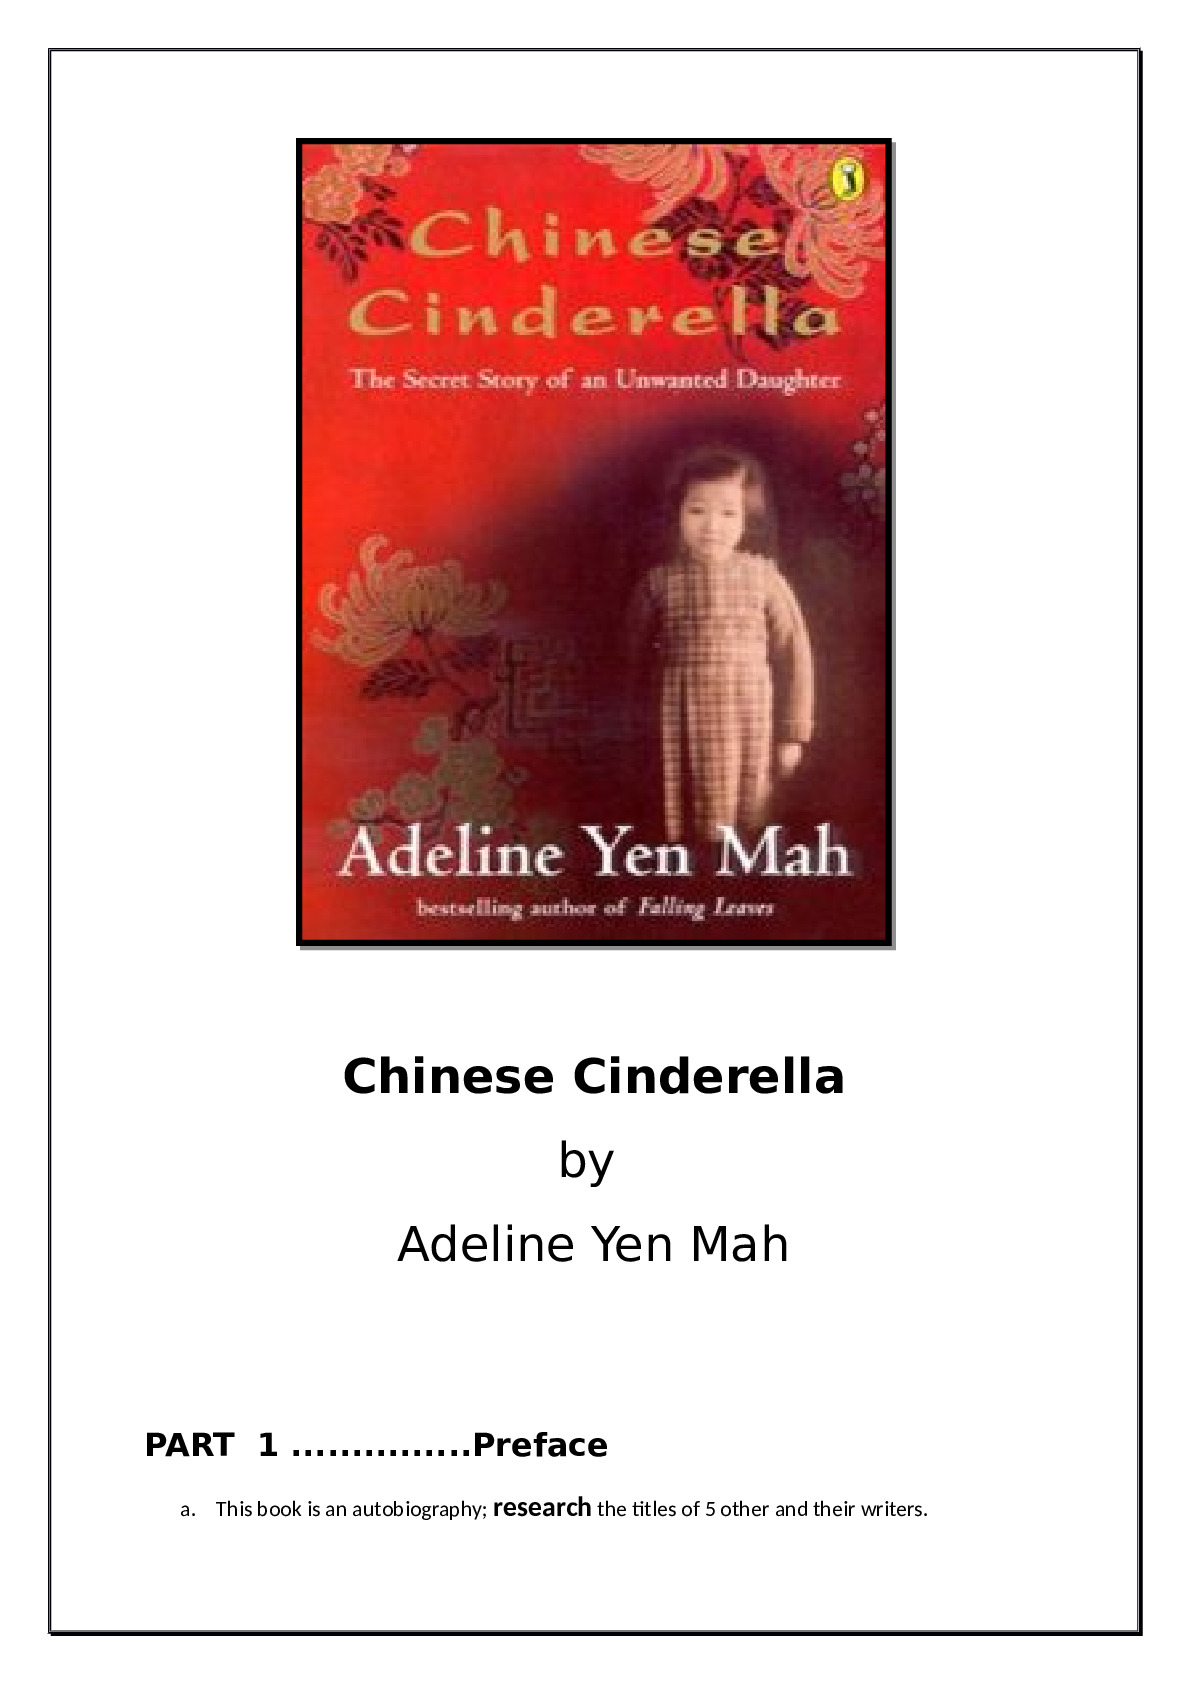 Chinese_Cinderella_Final_assignment_for_year_8.docx